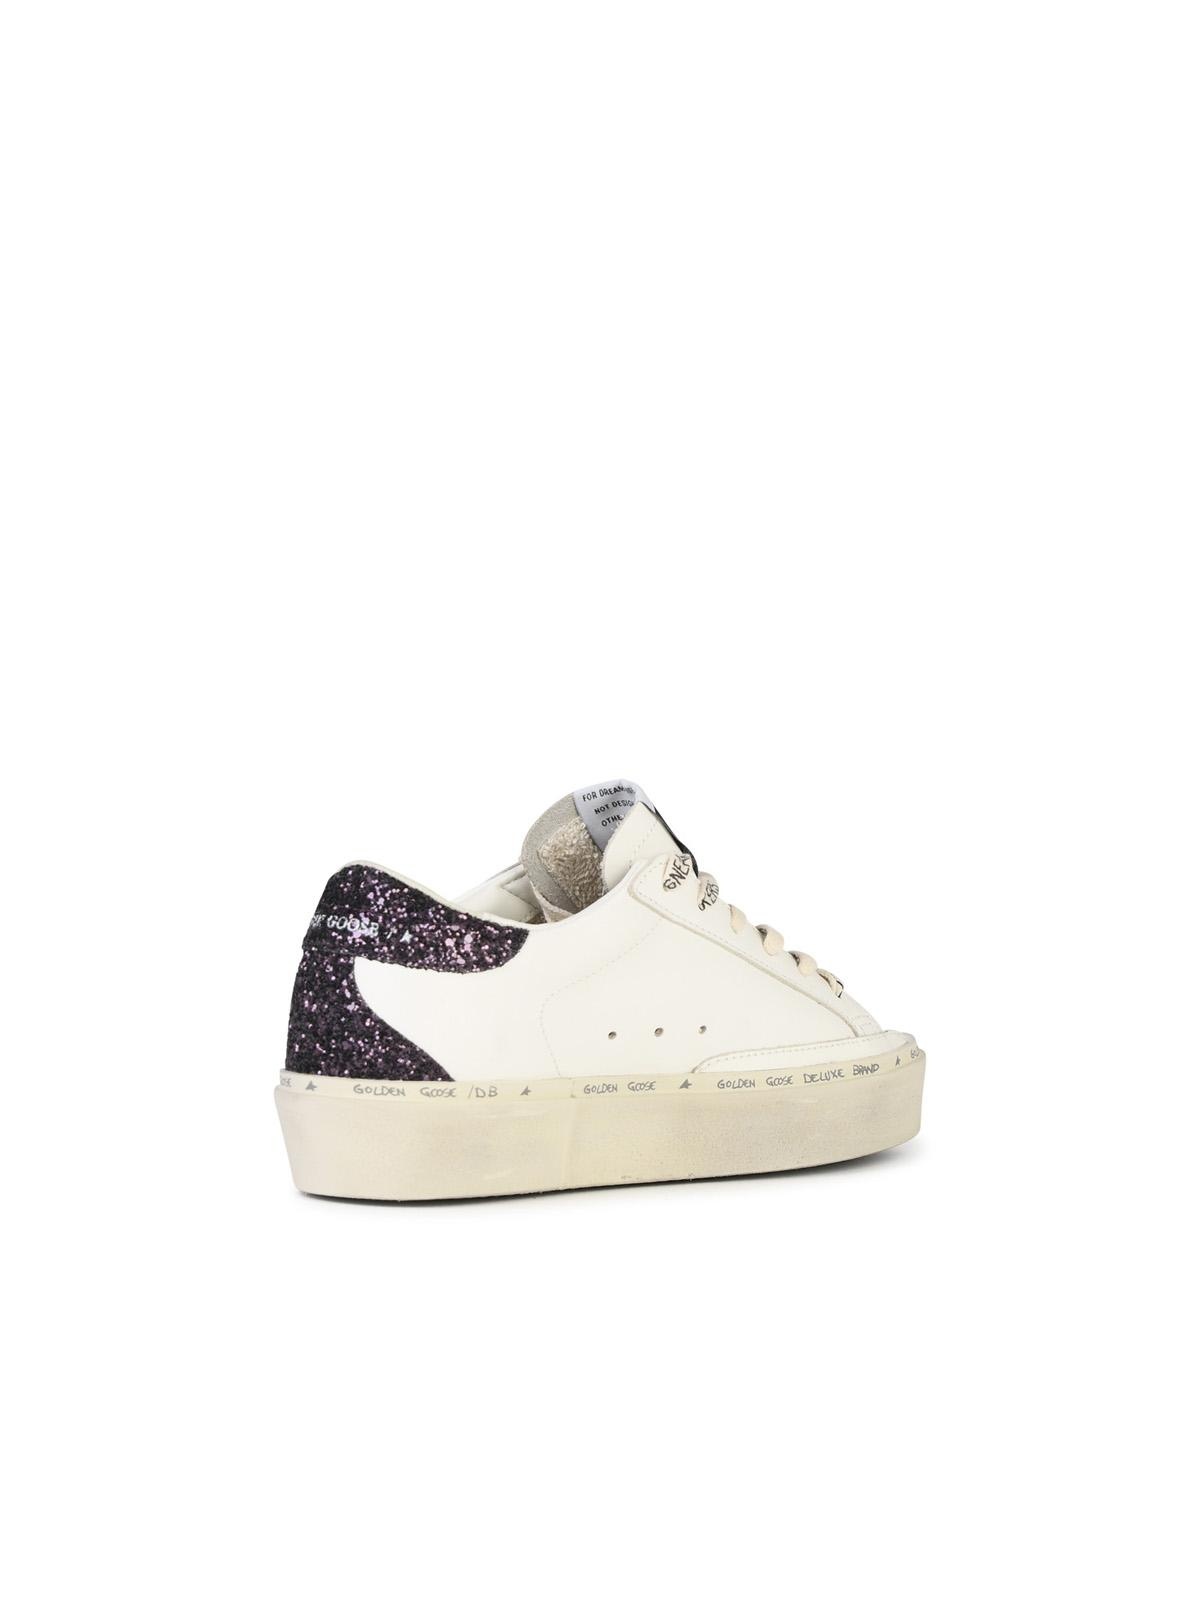 Golden Goose 'Hi Star' White Leather Sneakers Woman - 3